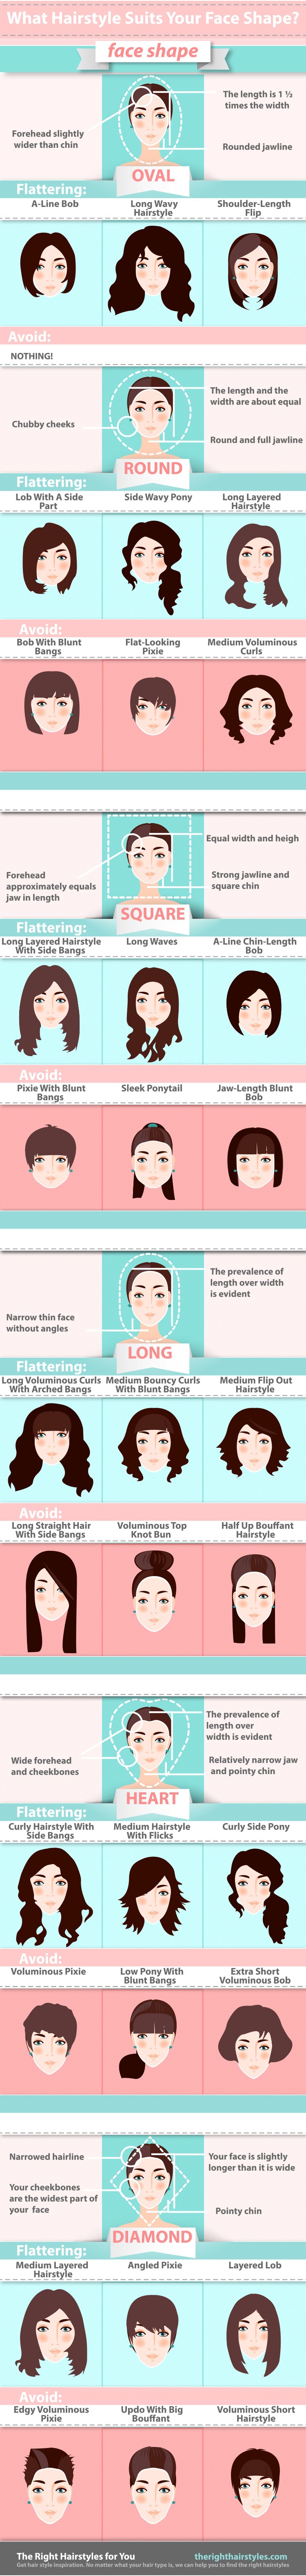 What Hairstyle suits your face shape?